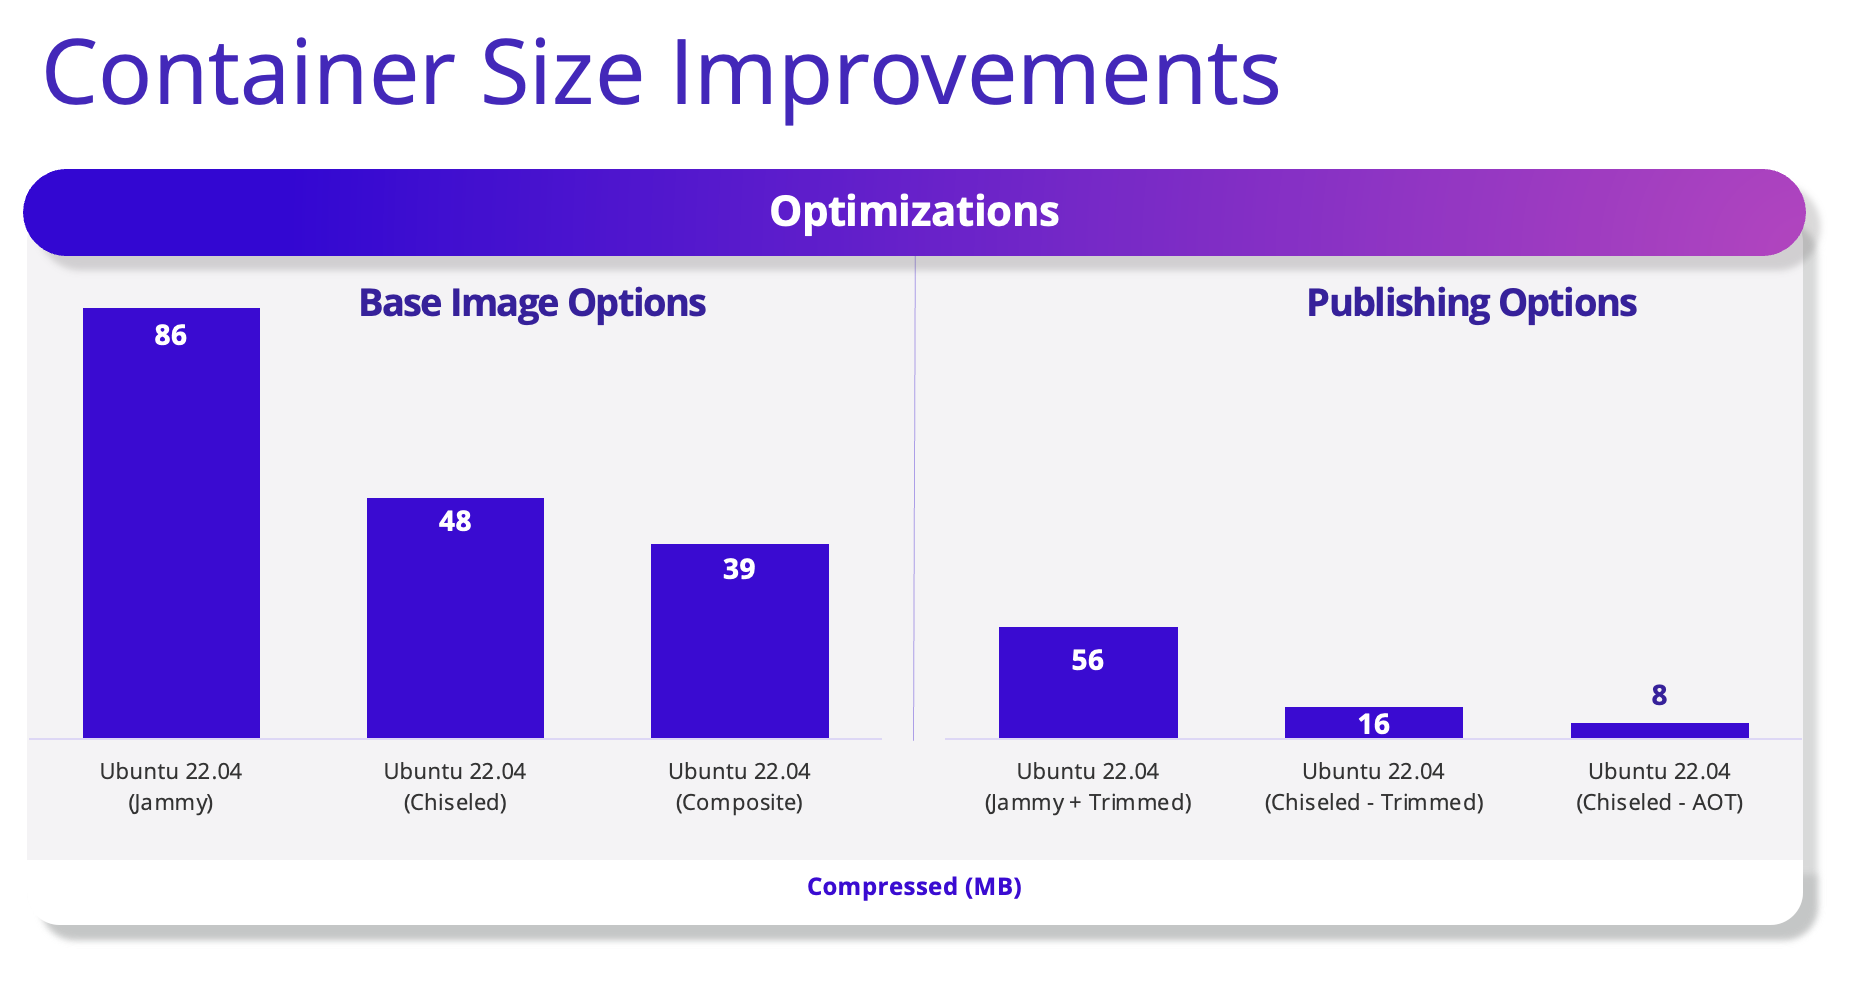 Image sizes with various options